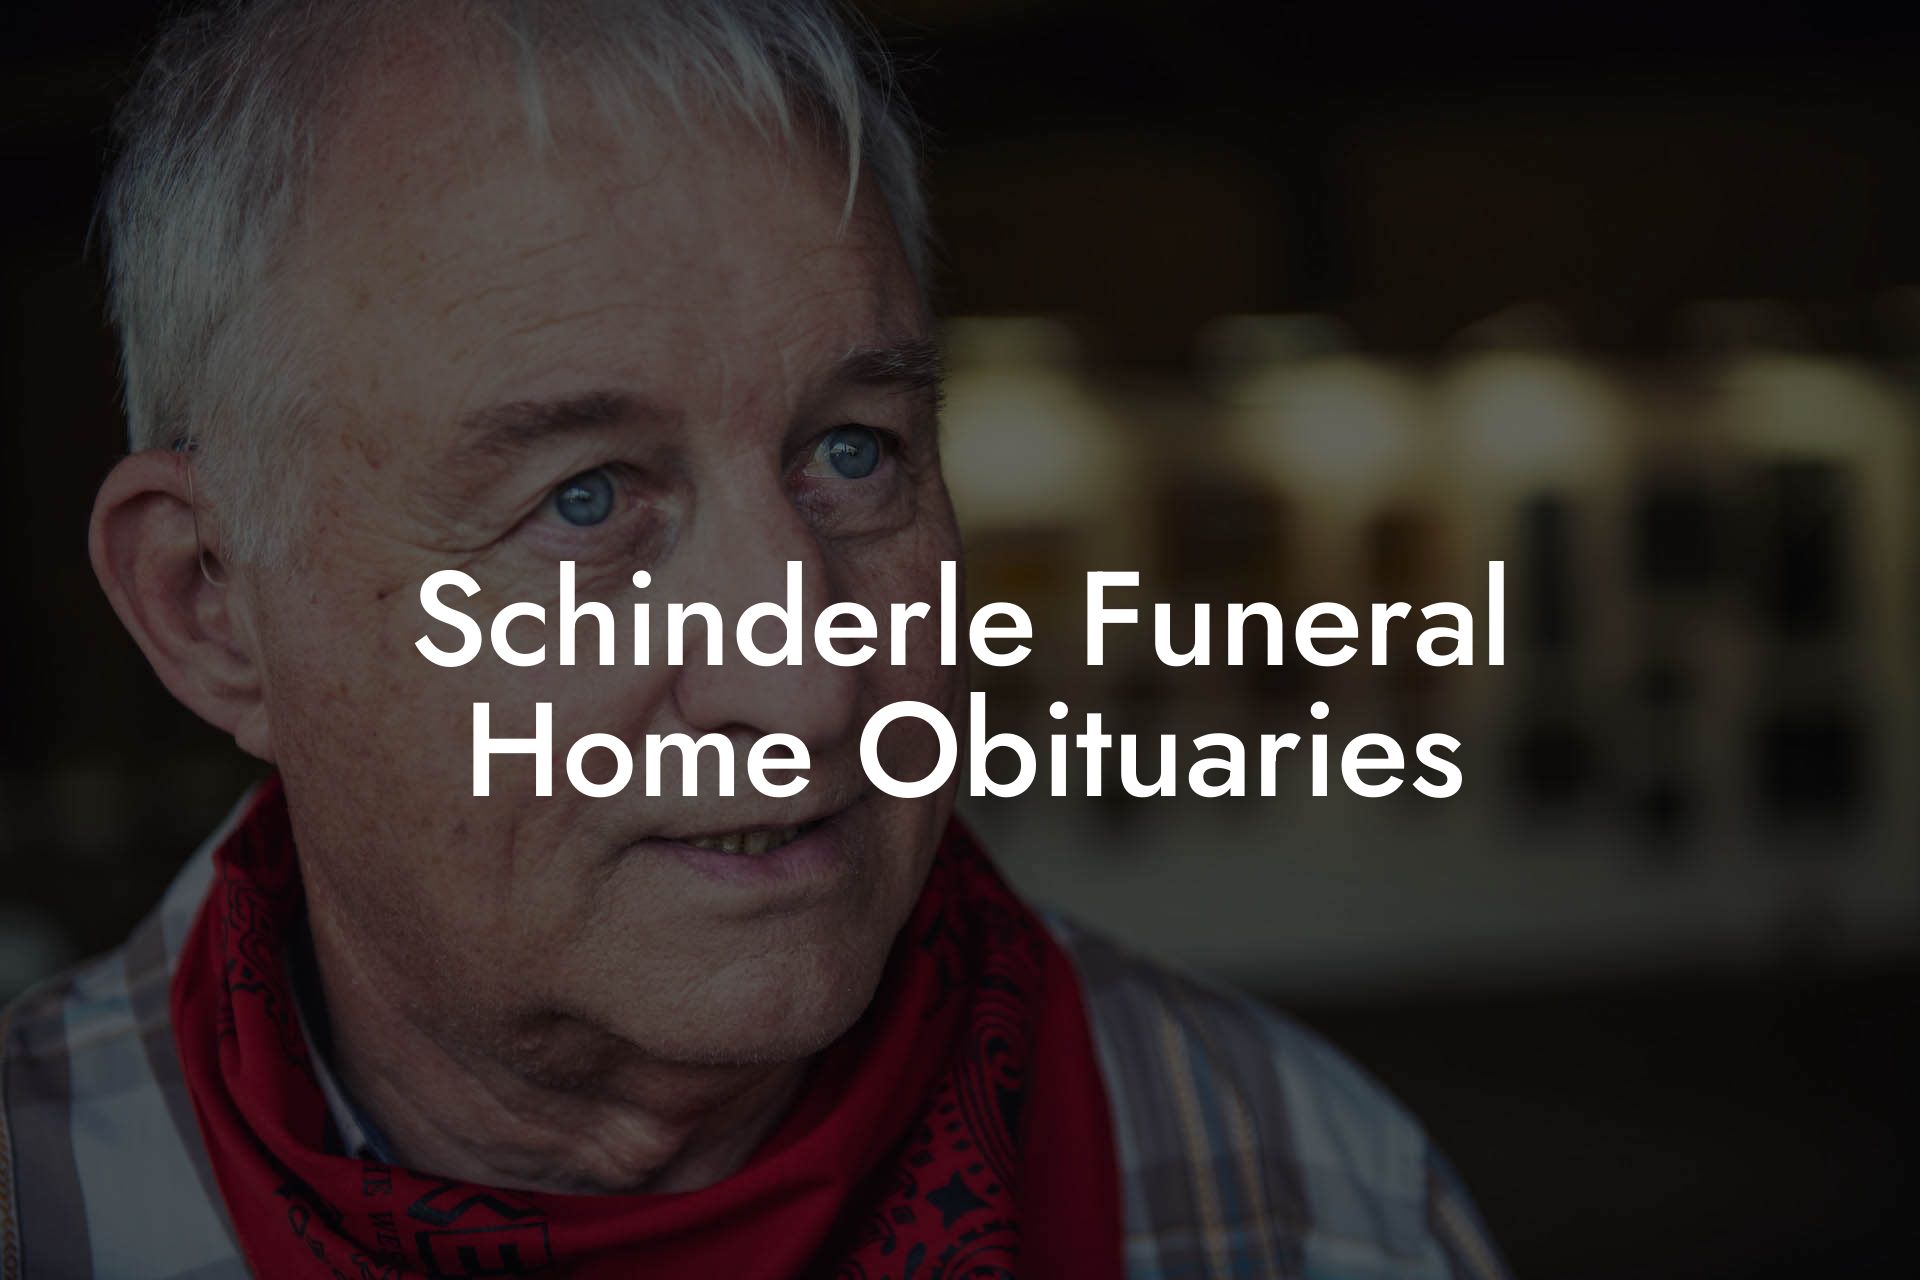 Schinderle Funeral Home Obituaries